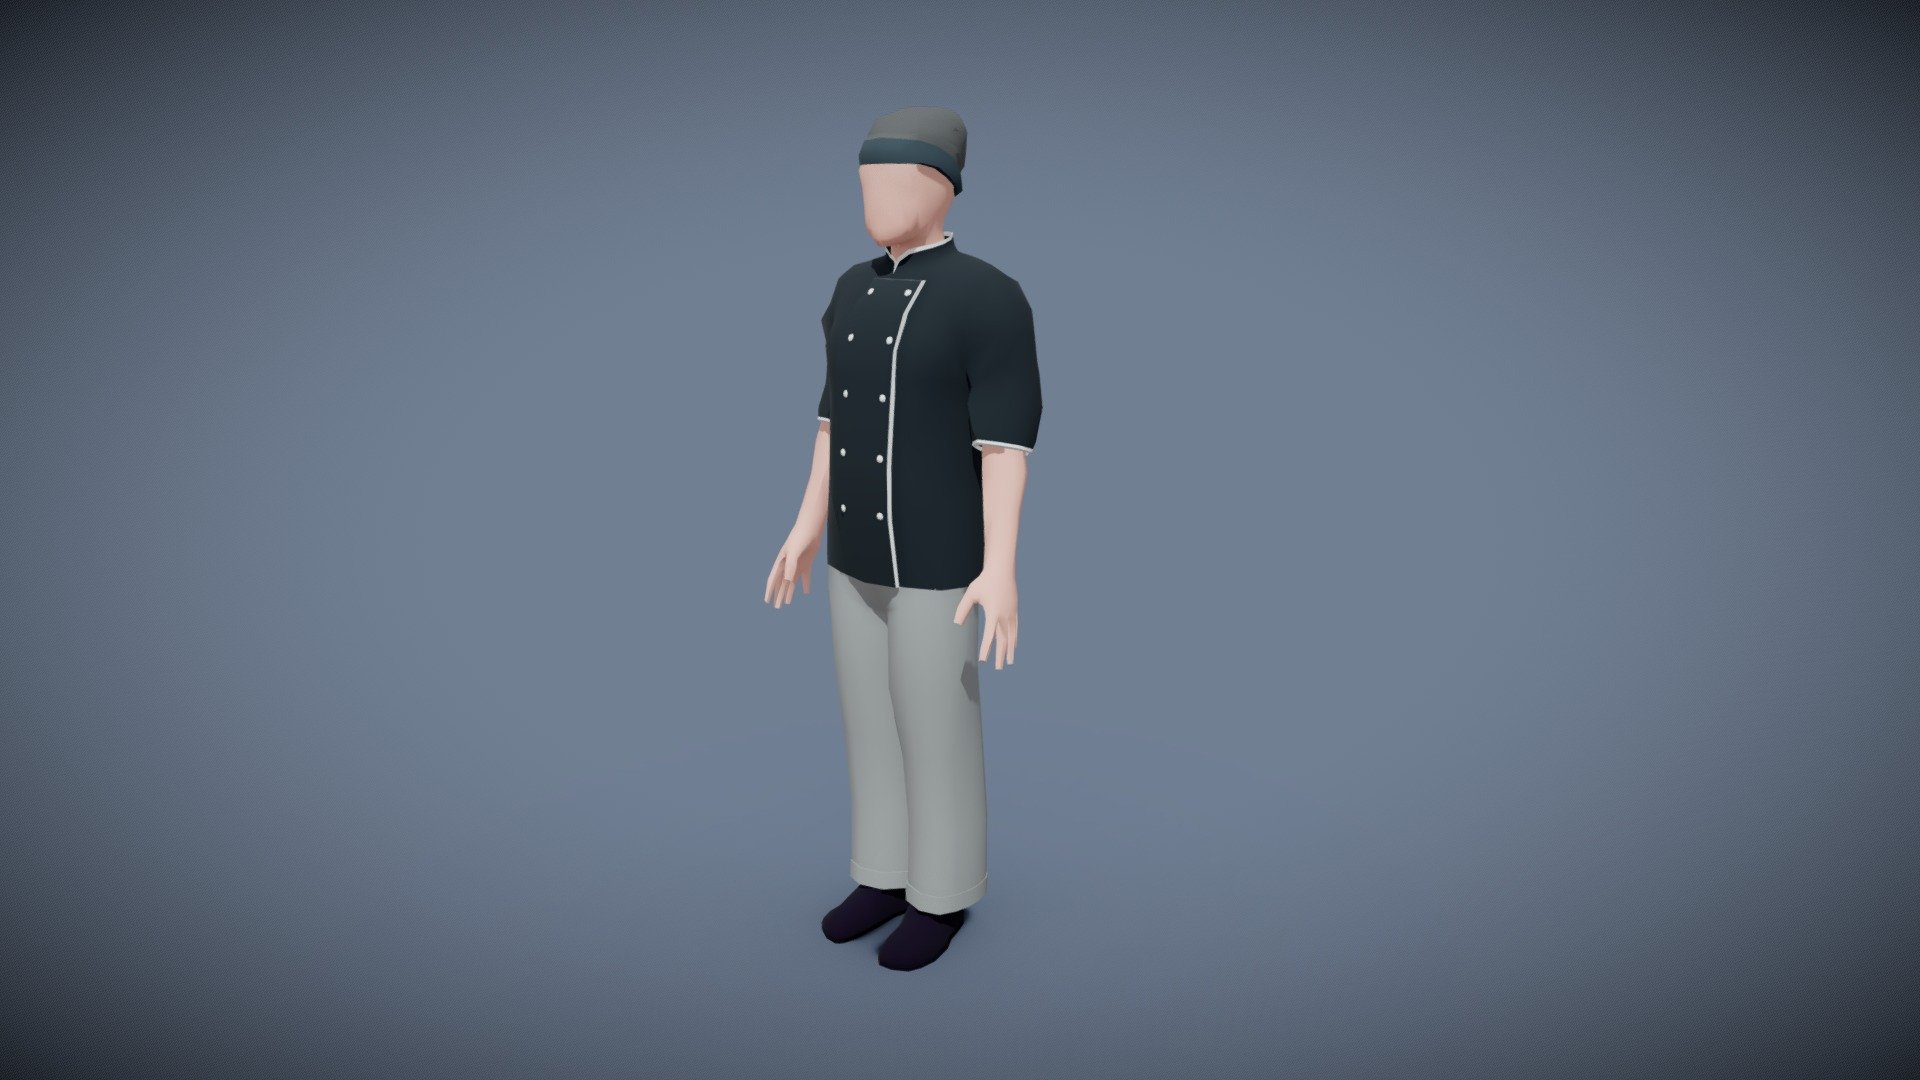 CHEF MAN BASE CHARACTER - Buy Royalty Free 3D model by TankStorm ...